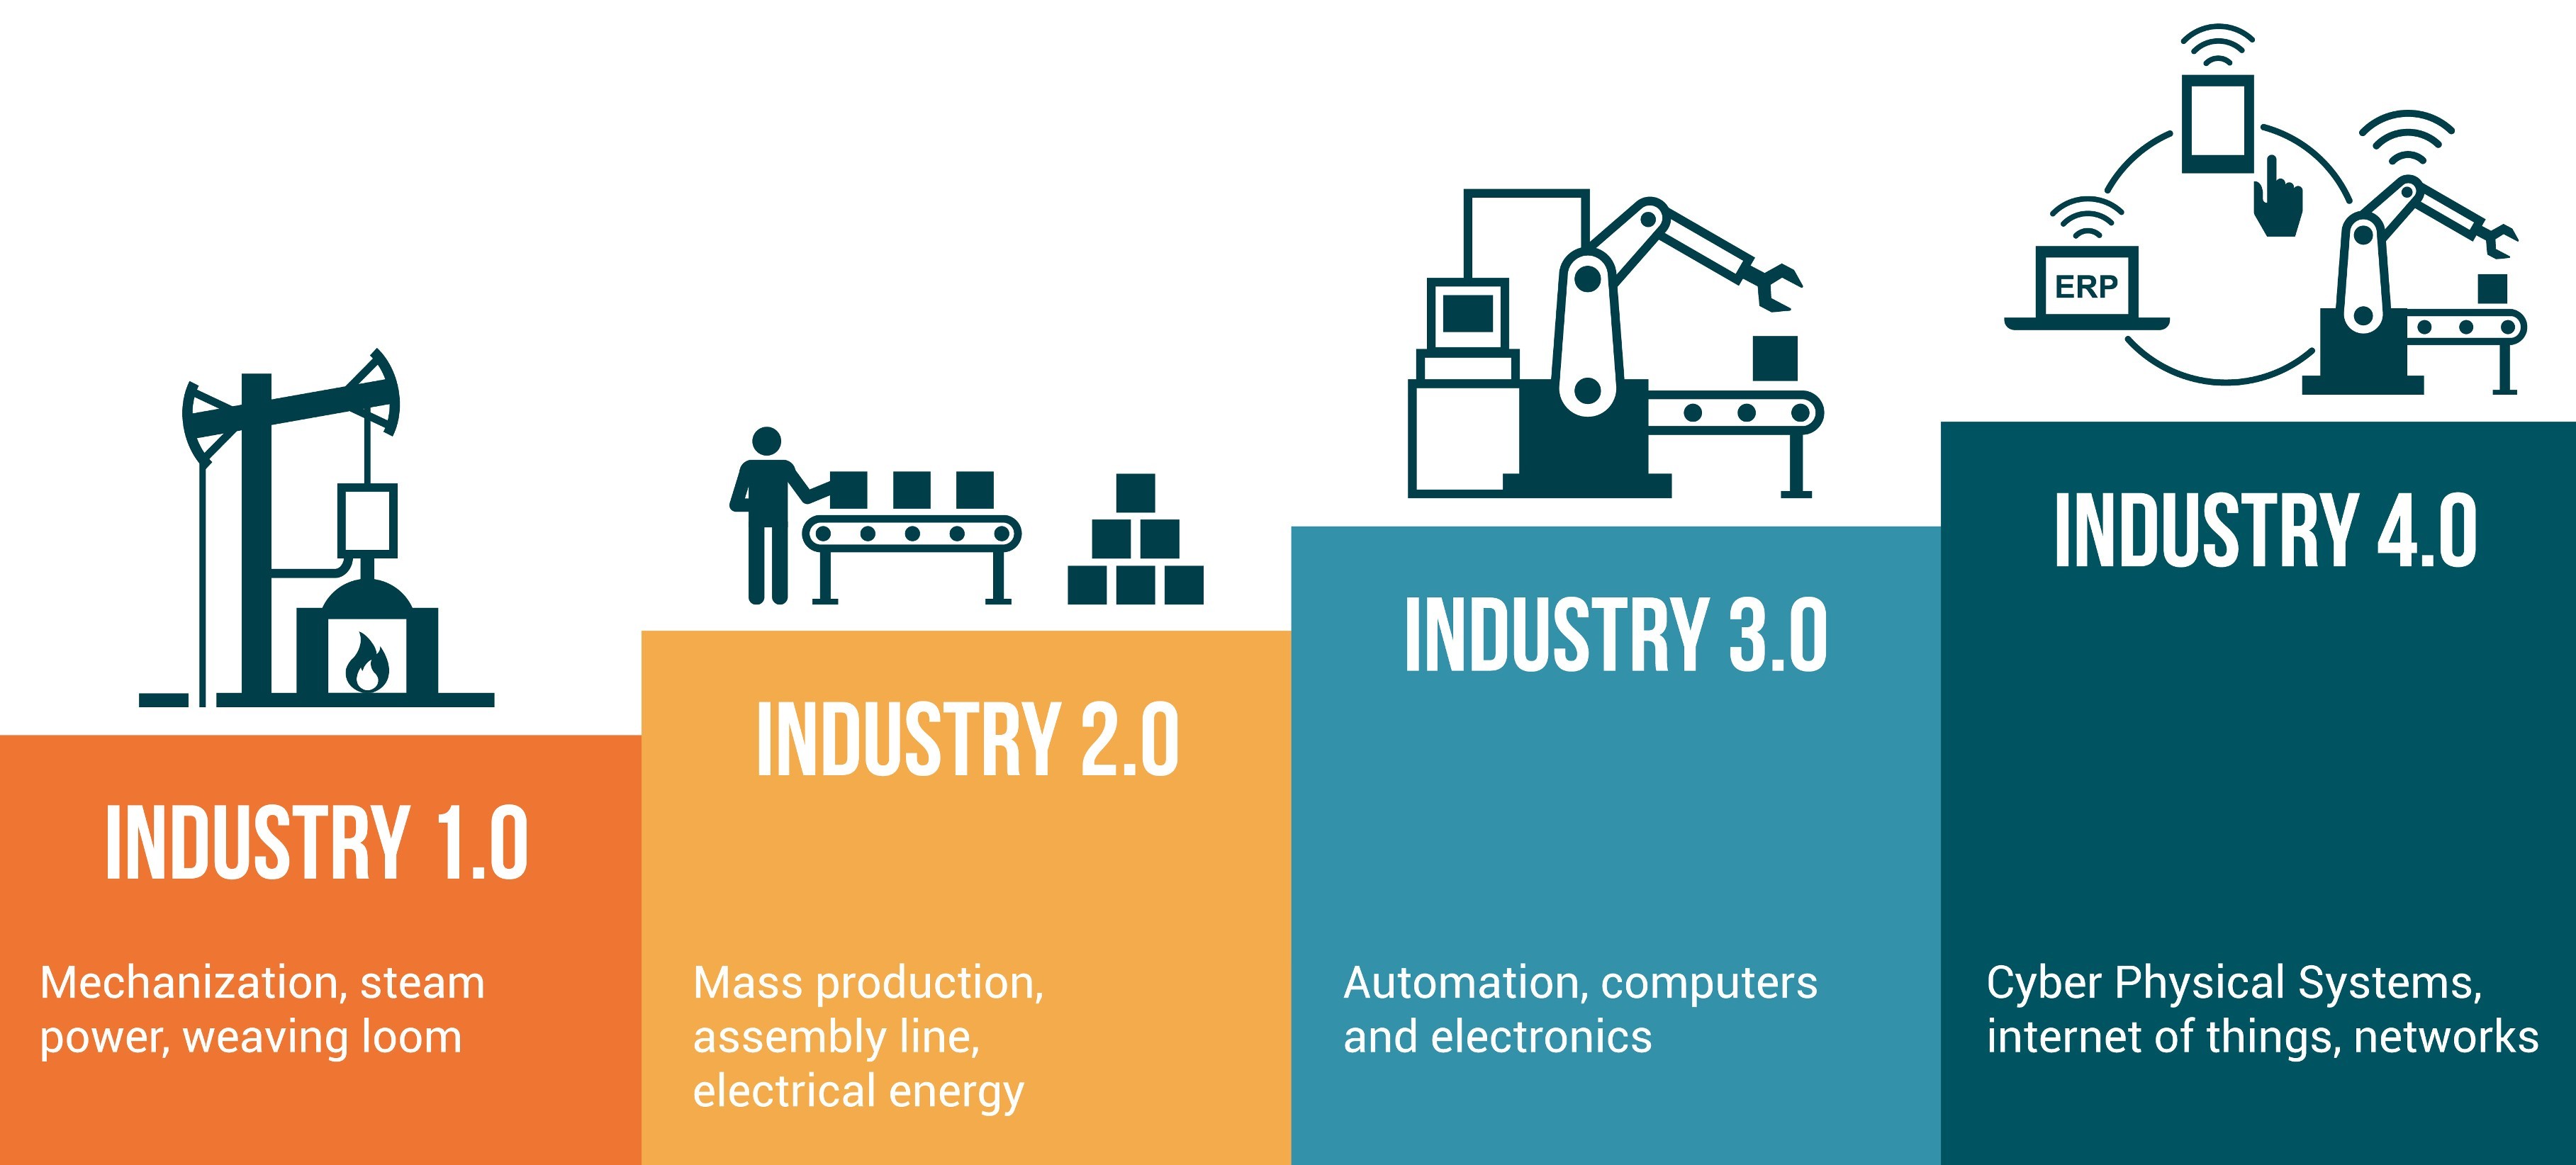 Combining World Class Manufacturing system and Industry 4.0